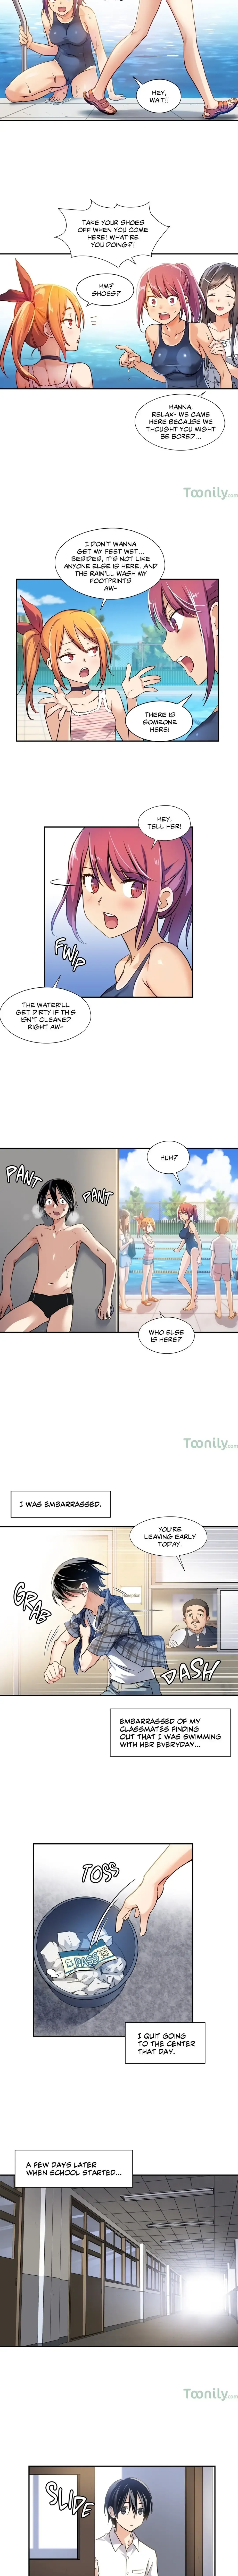 under-observation-my-first-loves-and-i-chap-4-6